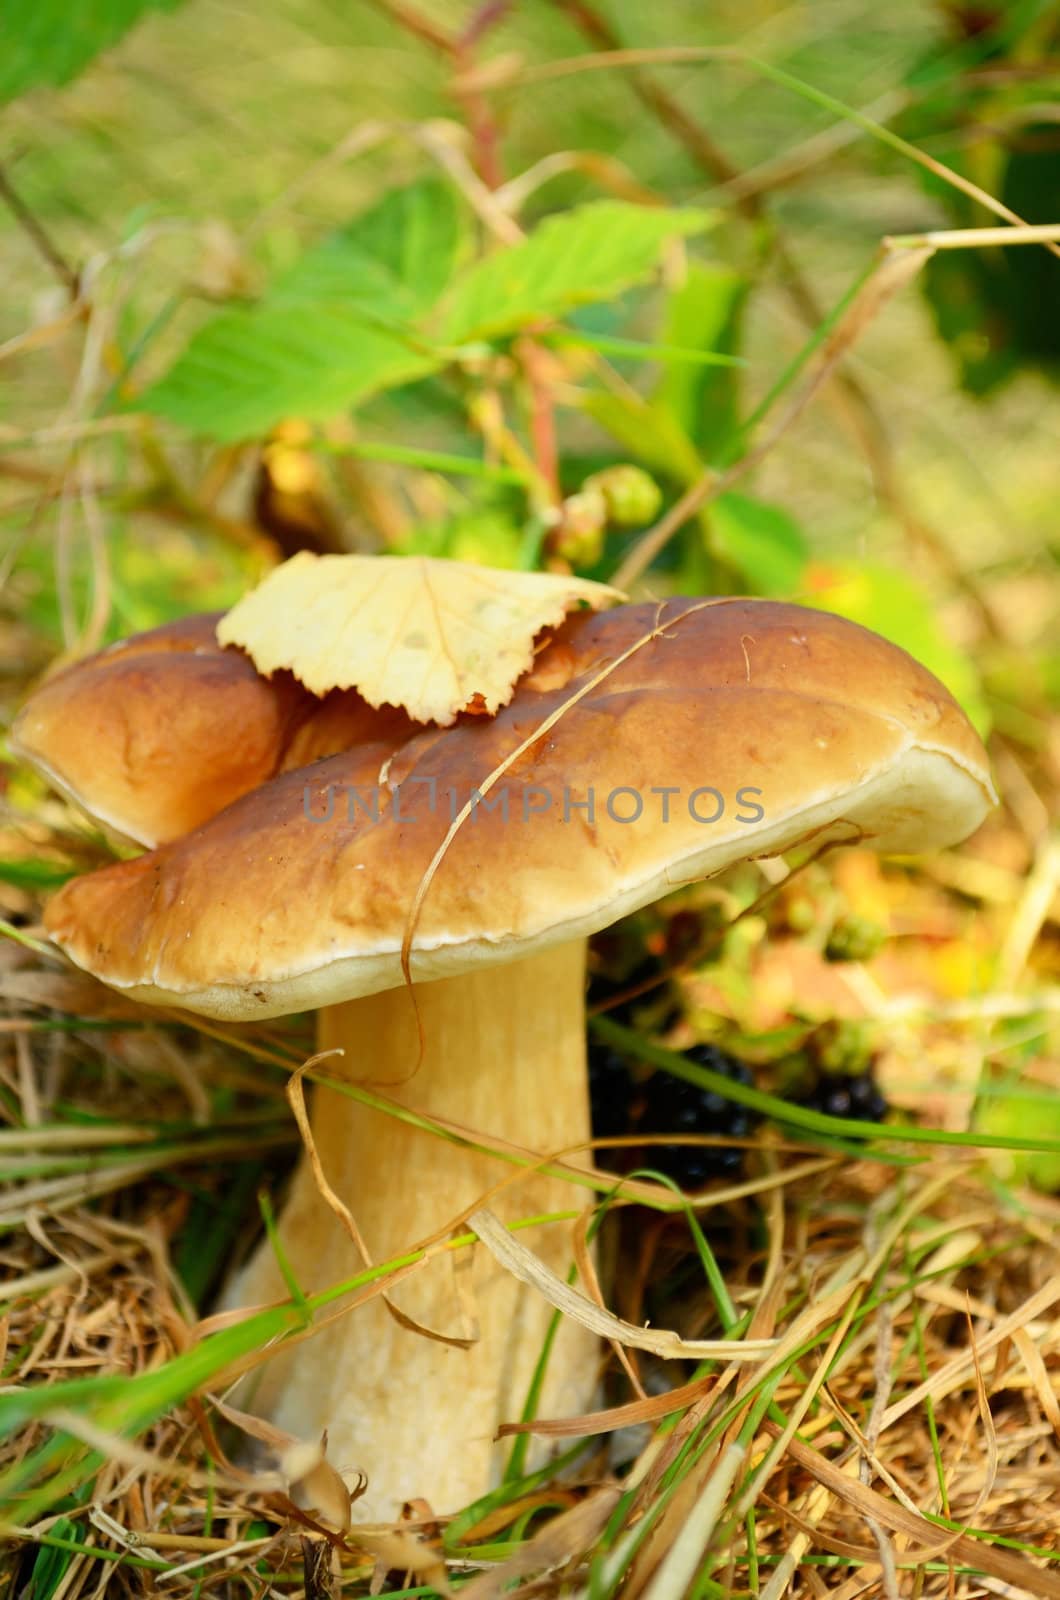 Edible mushroom in the grass at the edge of the forest